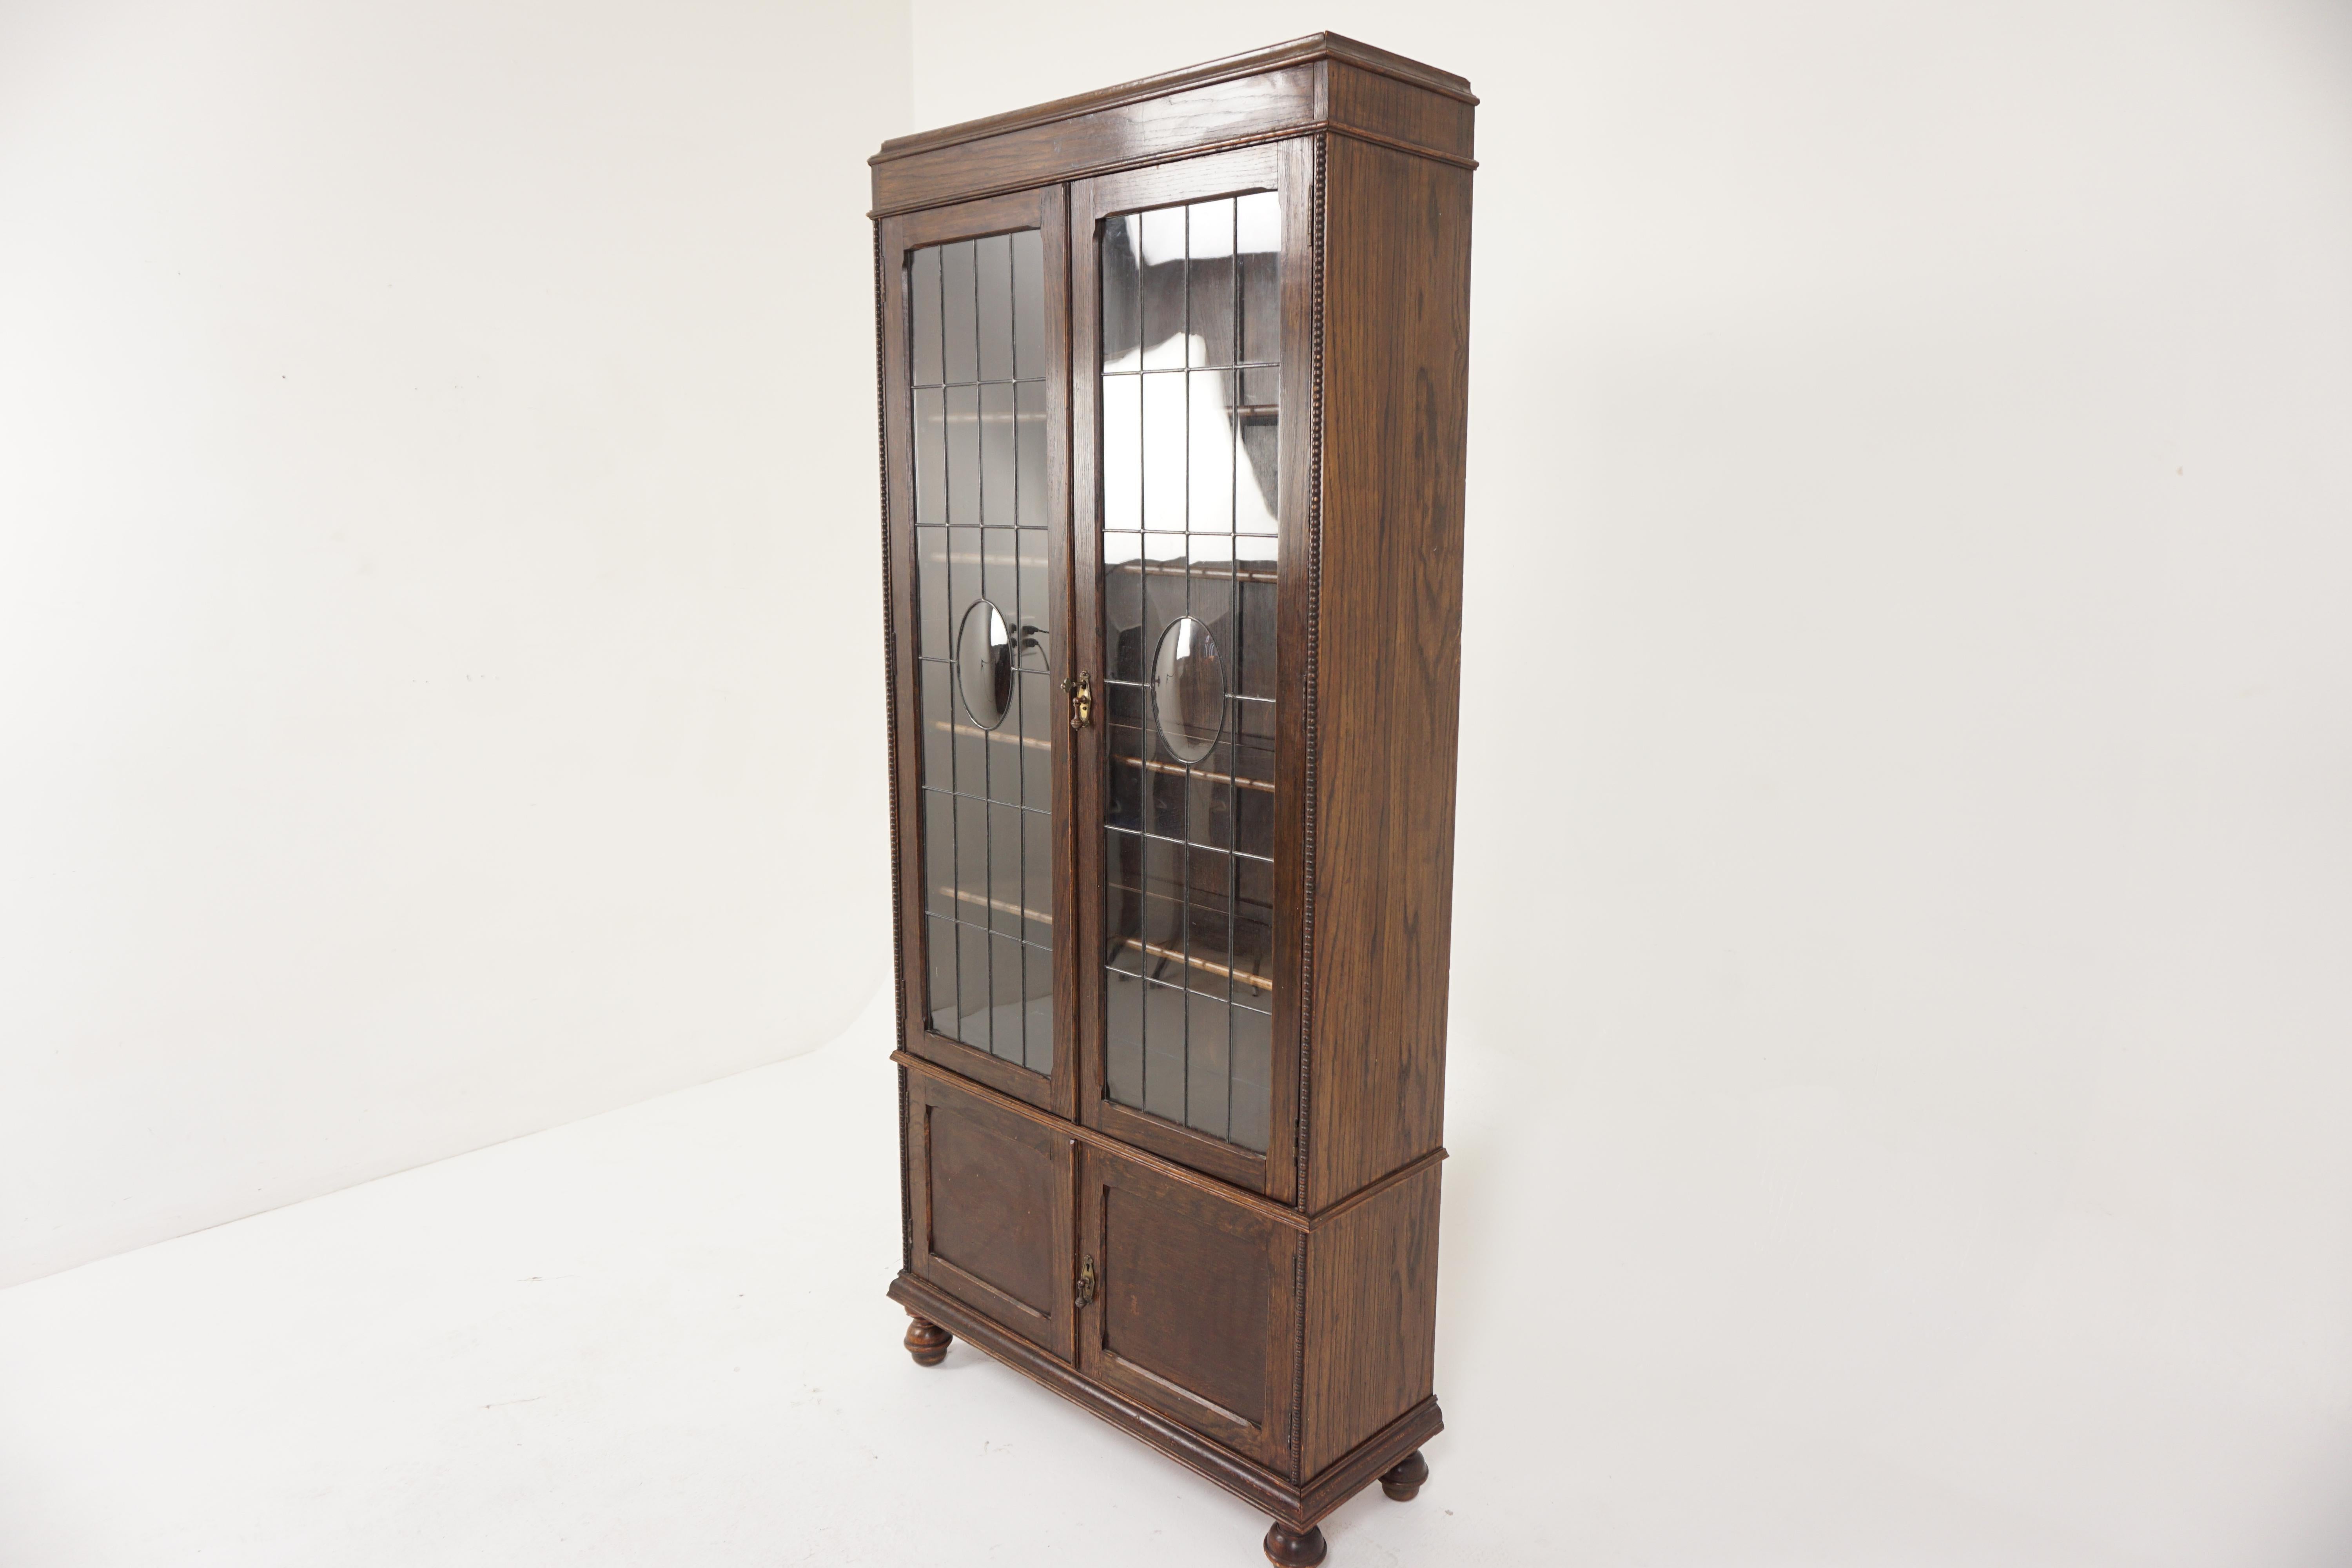 Antique oak leaded glass bookcase, display cabinet, Scotland 1910, B2941

Scotland 1910
Solid oak
Original finish
Moulded cornice on top
Pair of leaded glass doors
Original lock and key
Three graduating wooden shelves
Beading on the